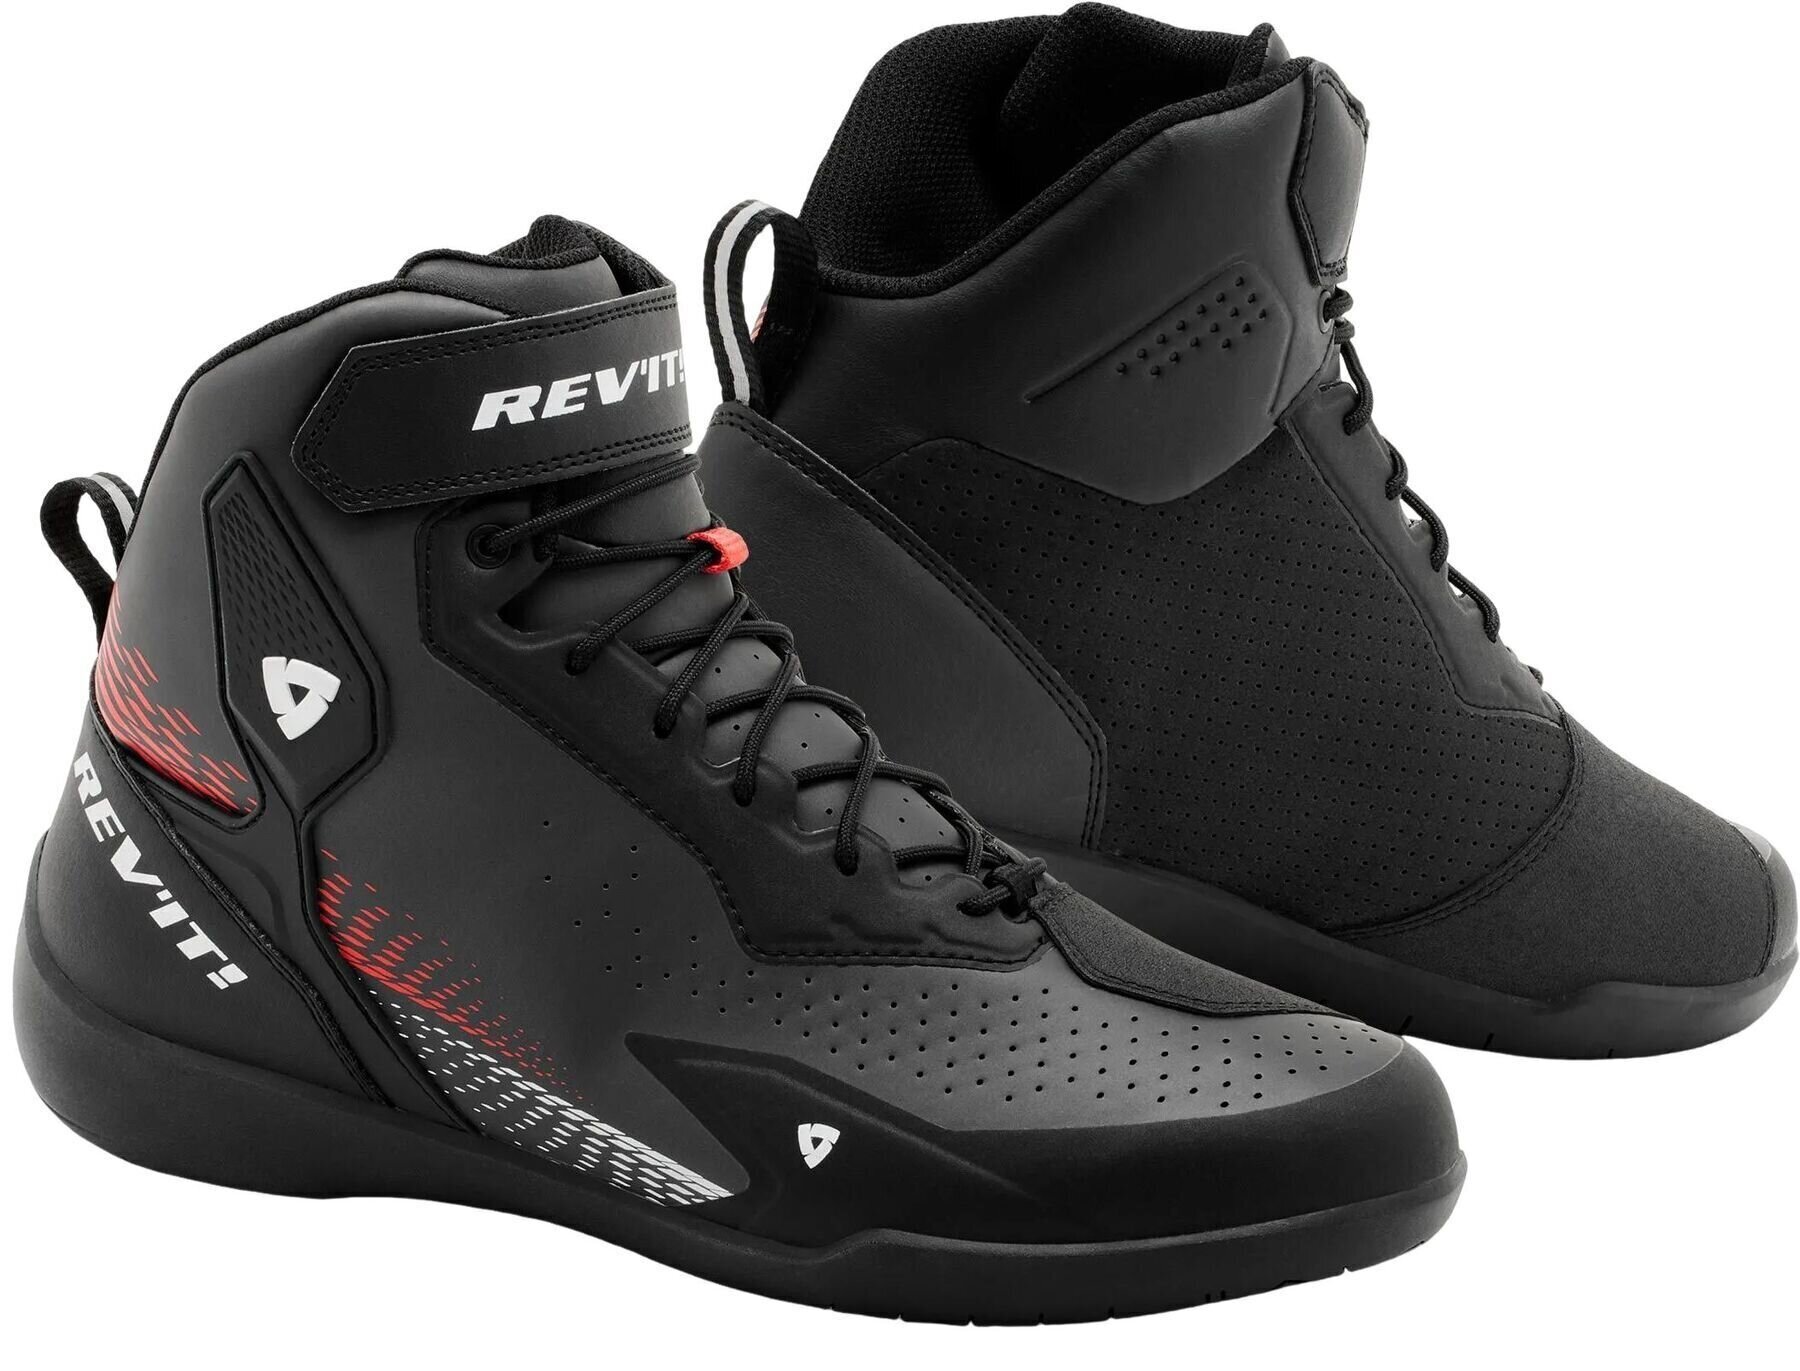 Motorcycle Boots Rev'it! Shoes G-Force 2 Black/Neon Red 40 Motorcycle Boots